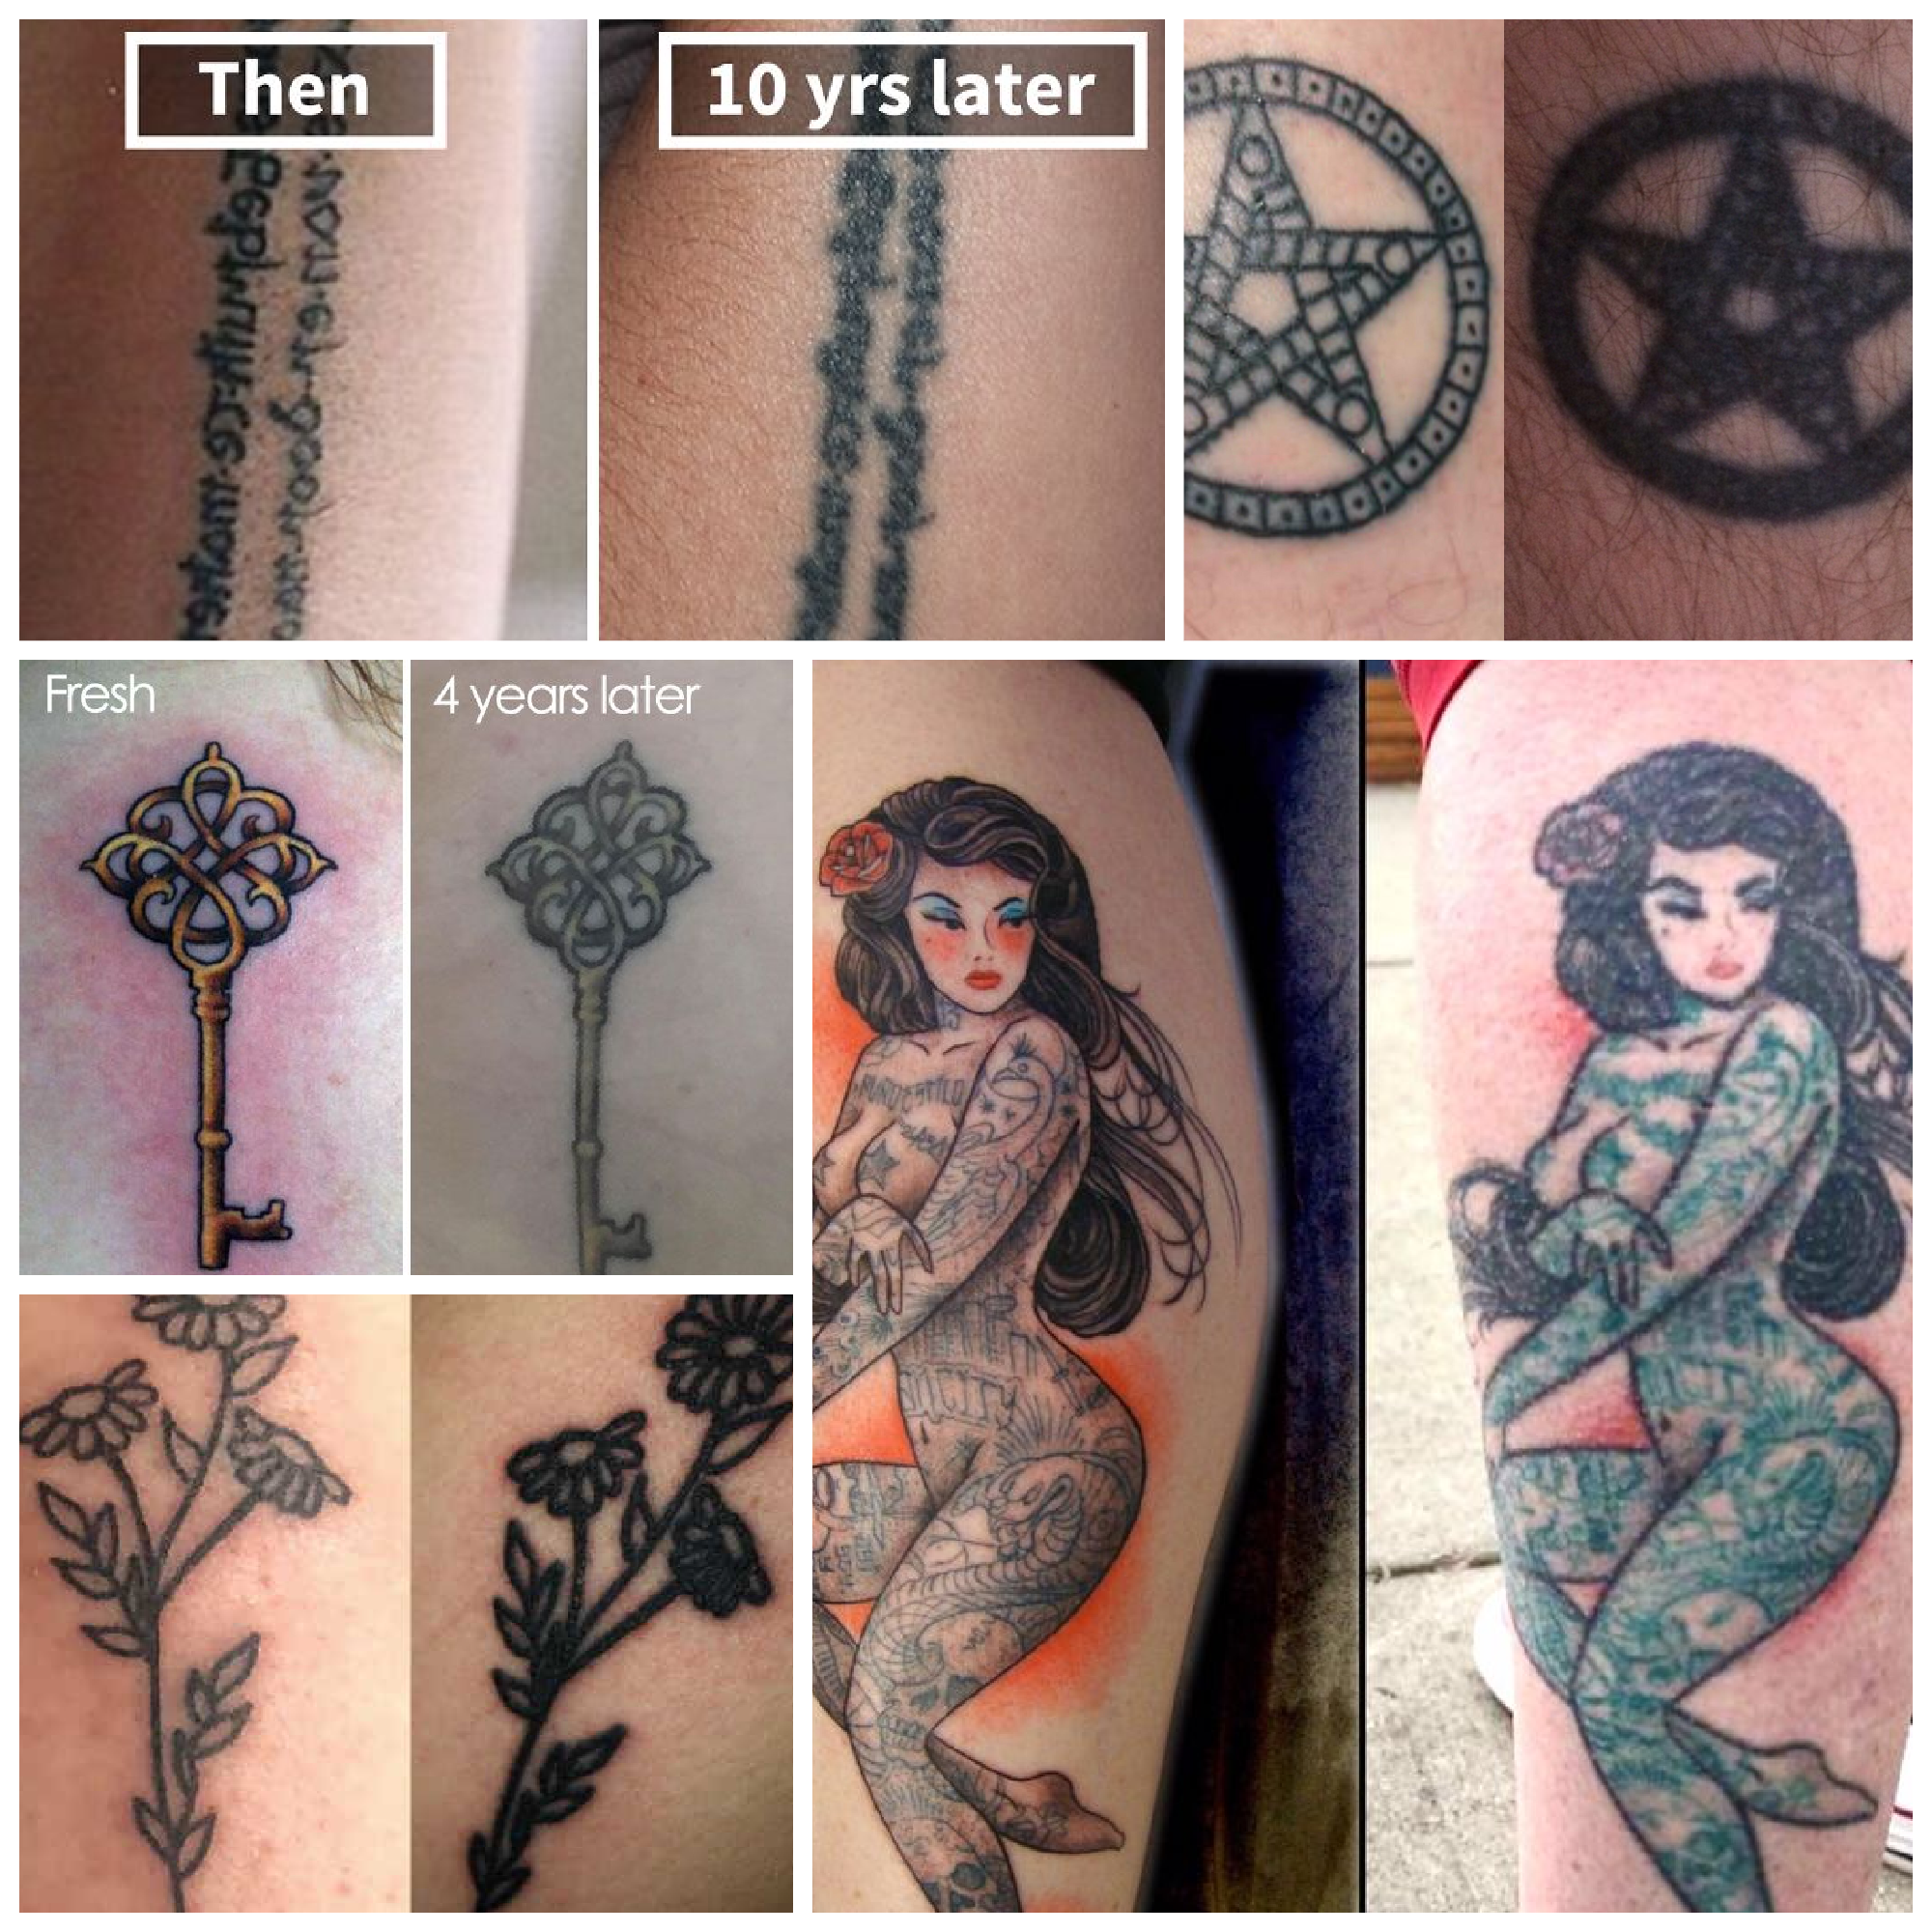 tattoos before and after aging